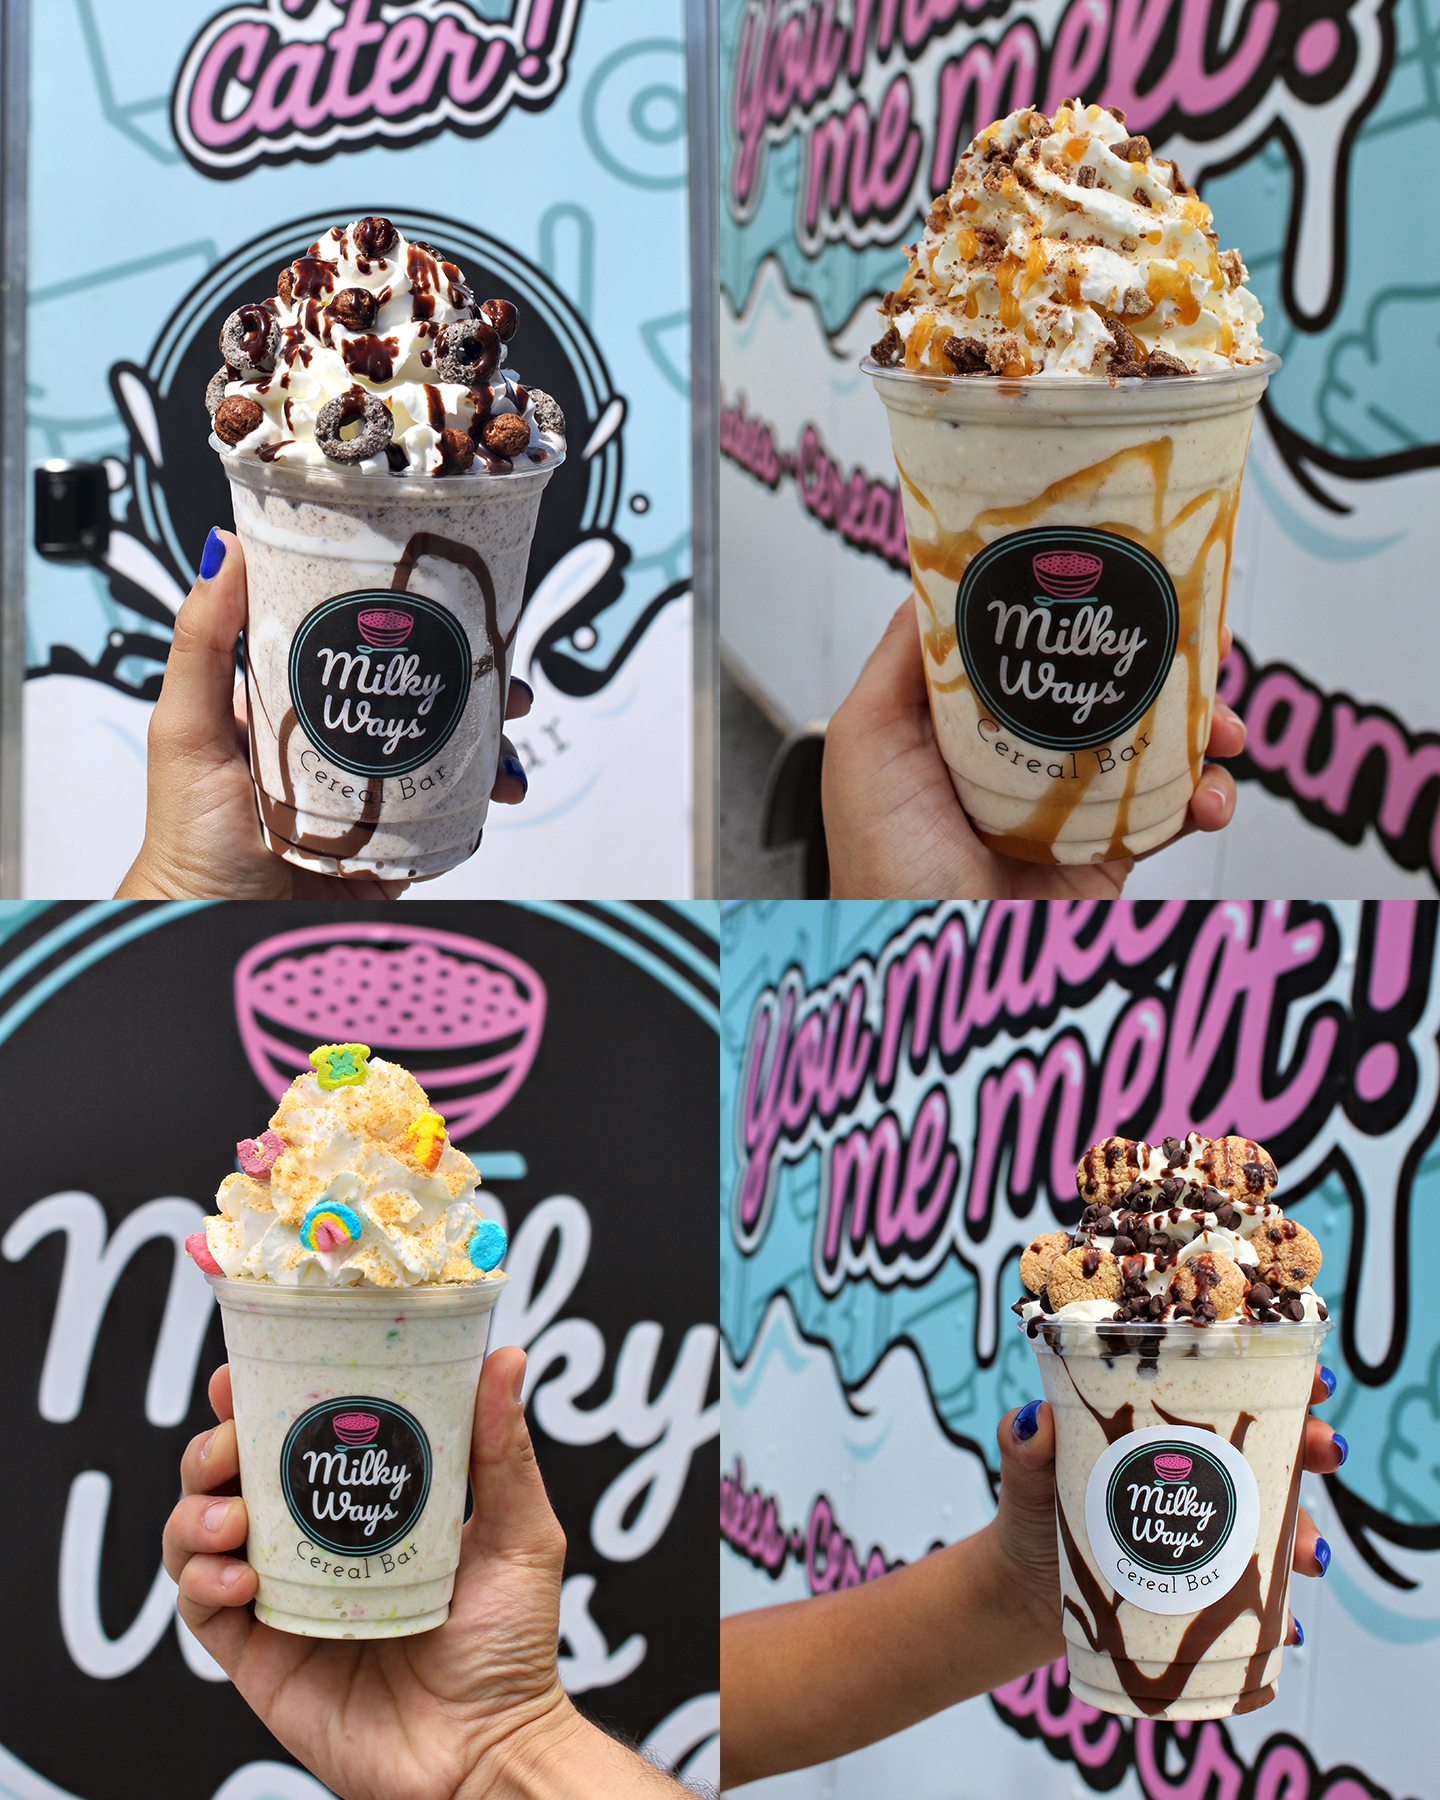 Milky Ways Cereal Bar | Miami's One & Only Cereal Bar!